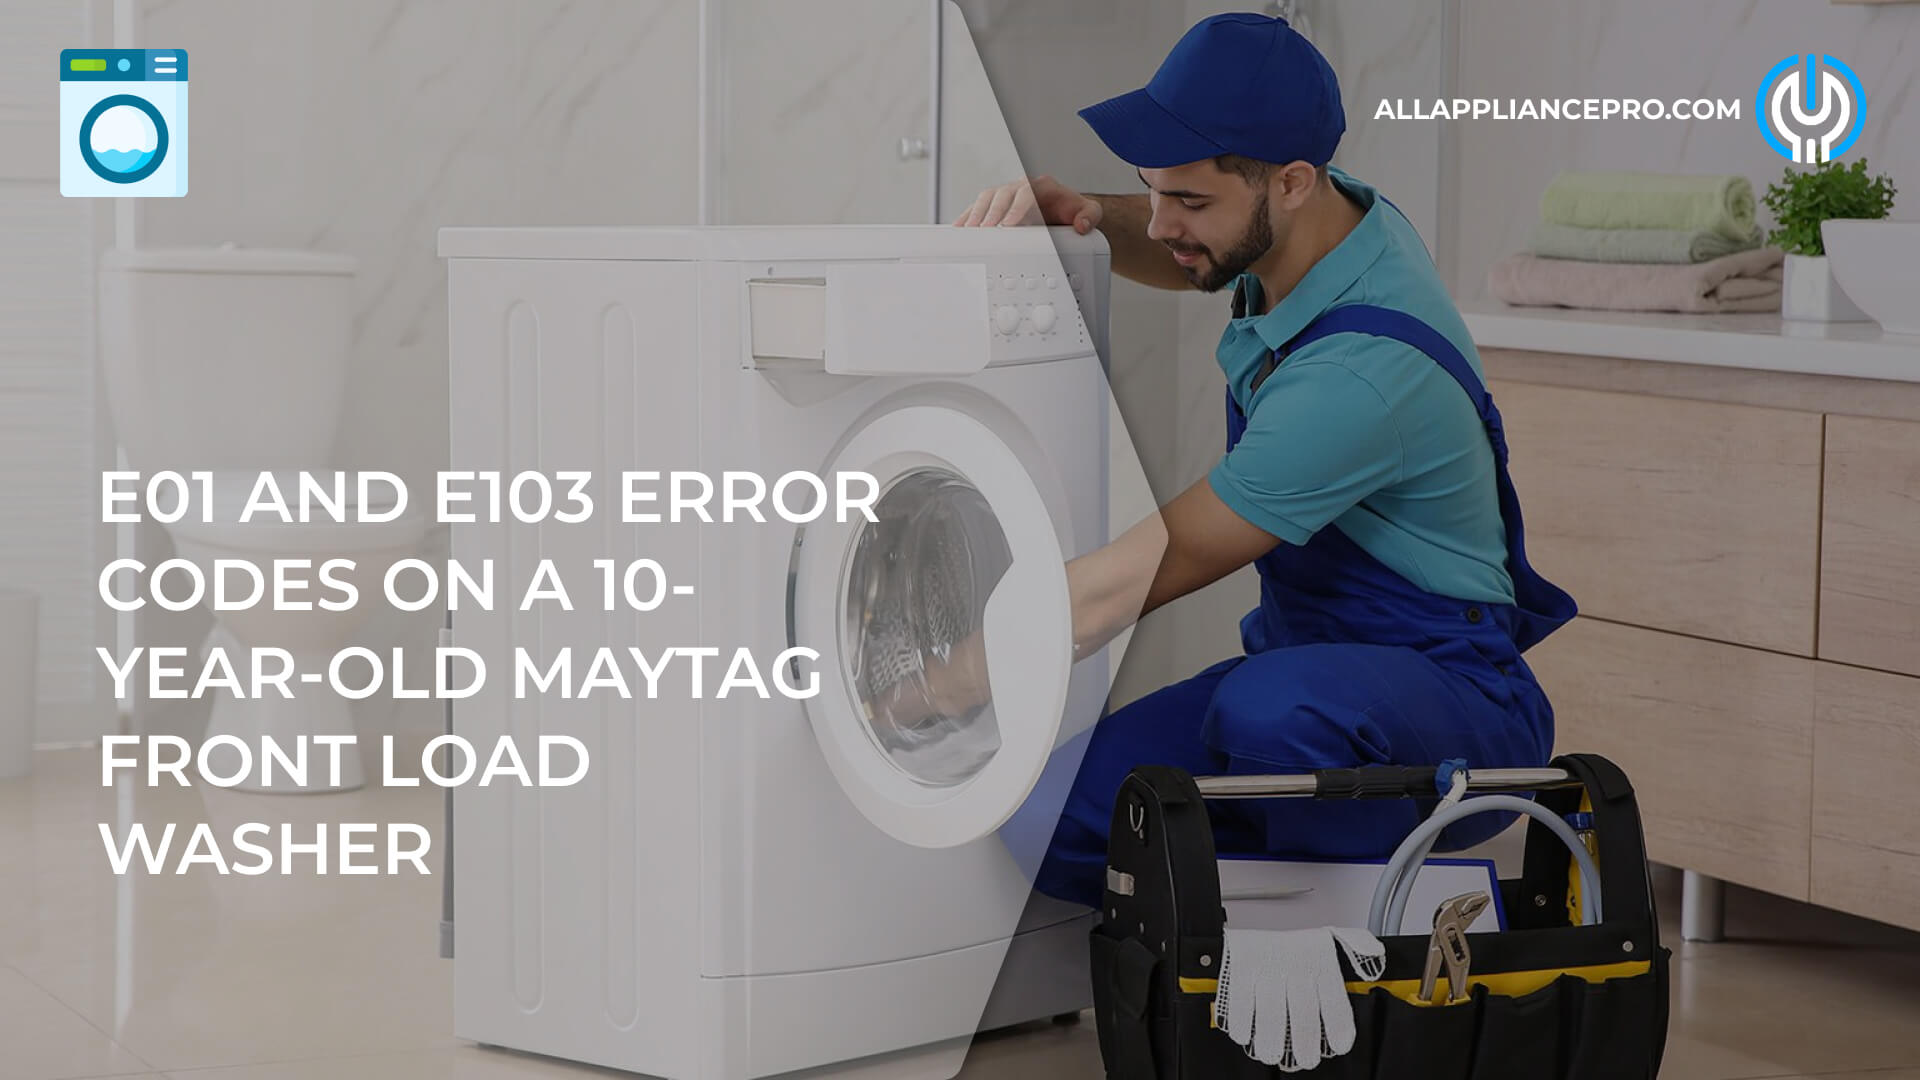 e01-and-e103-error-codes-on-a-10-year-old-maytag-front-load-washer